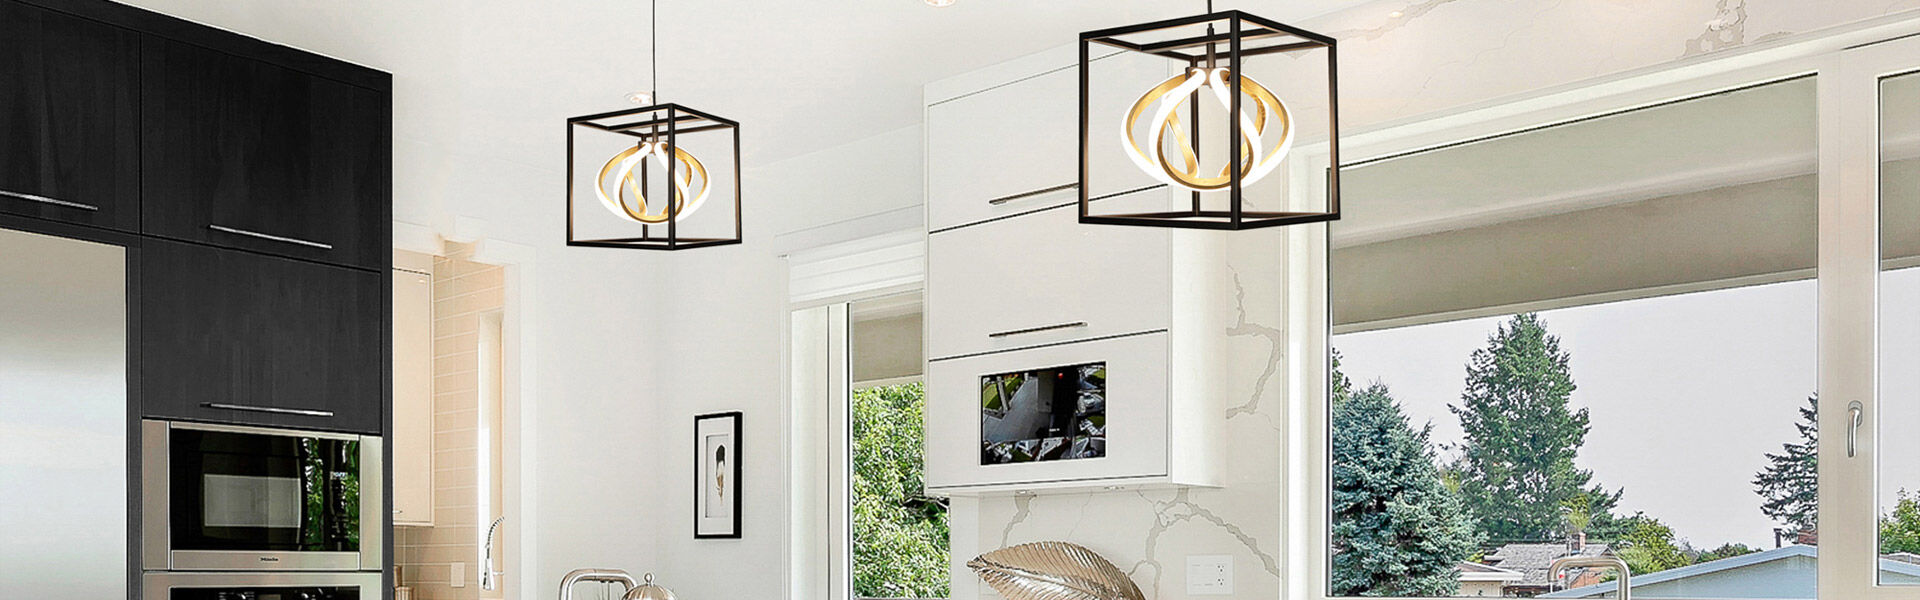 WAC Lighting | Up to 15% Off Select Designs | ends 2.26